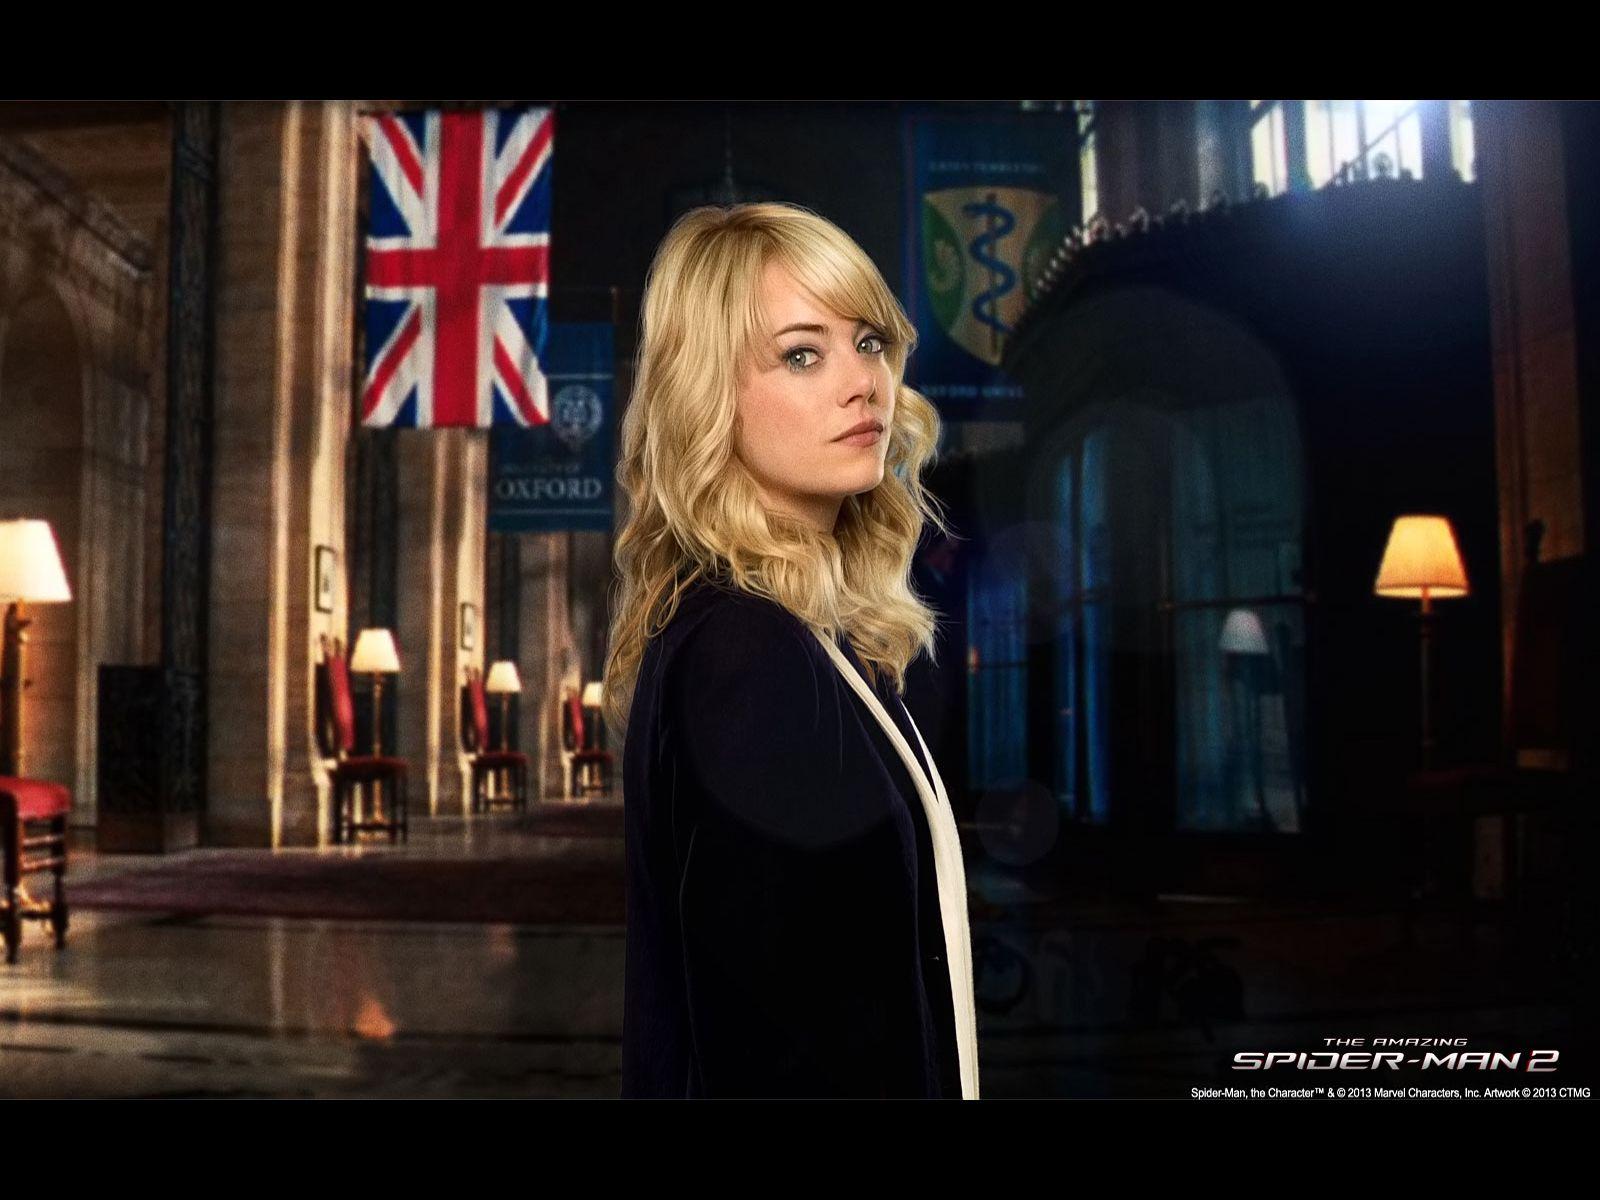 The Amazing Spider Man 2: Gwen Stacy Wallpaper. The Amazing